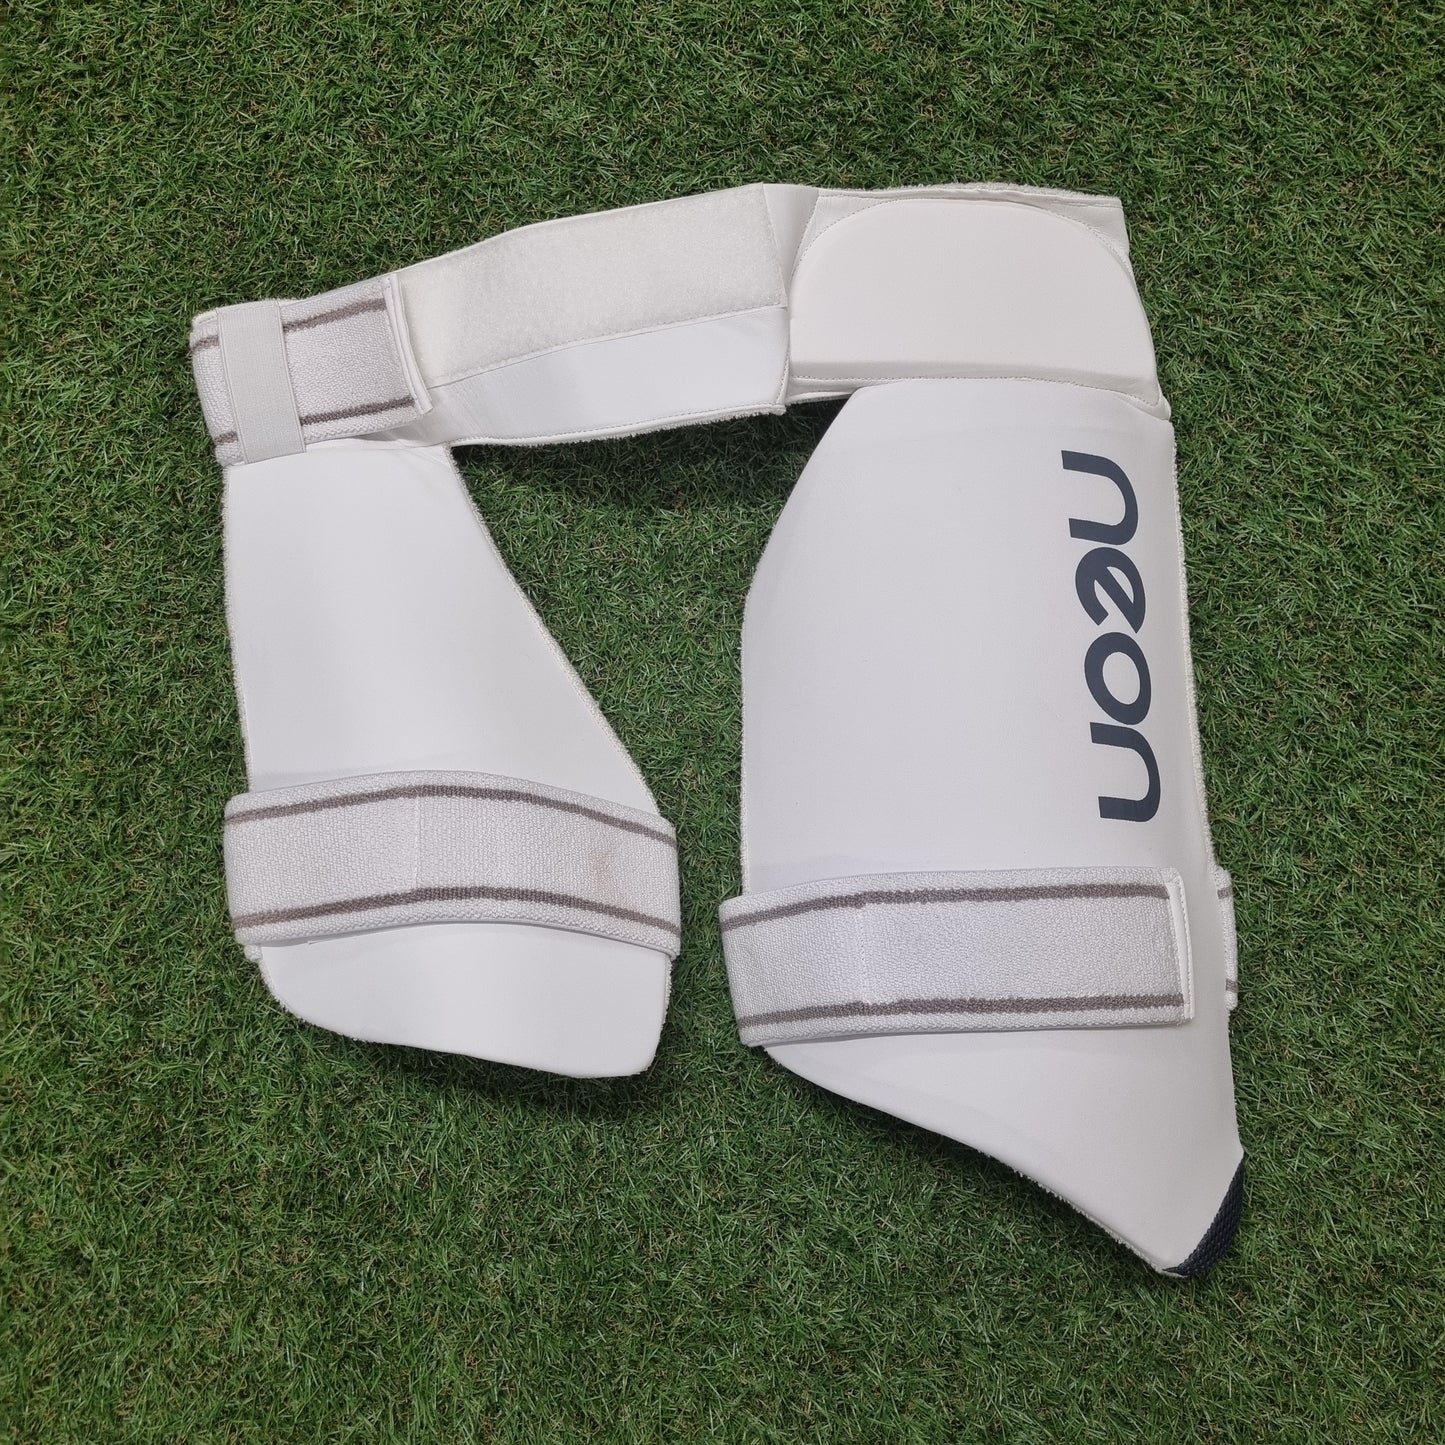 Pro Players Combi-Thigh Guard